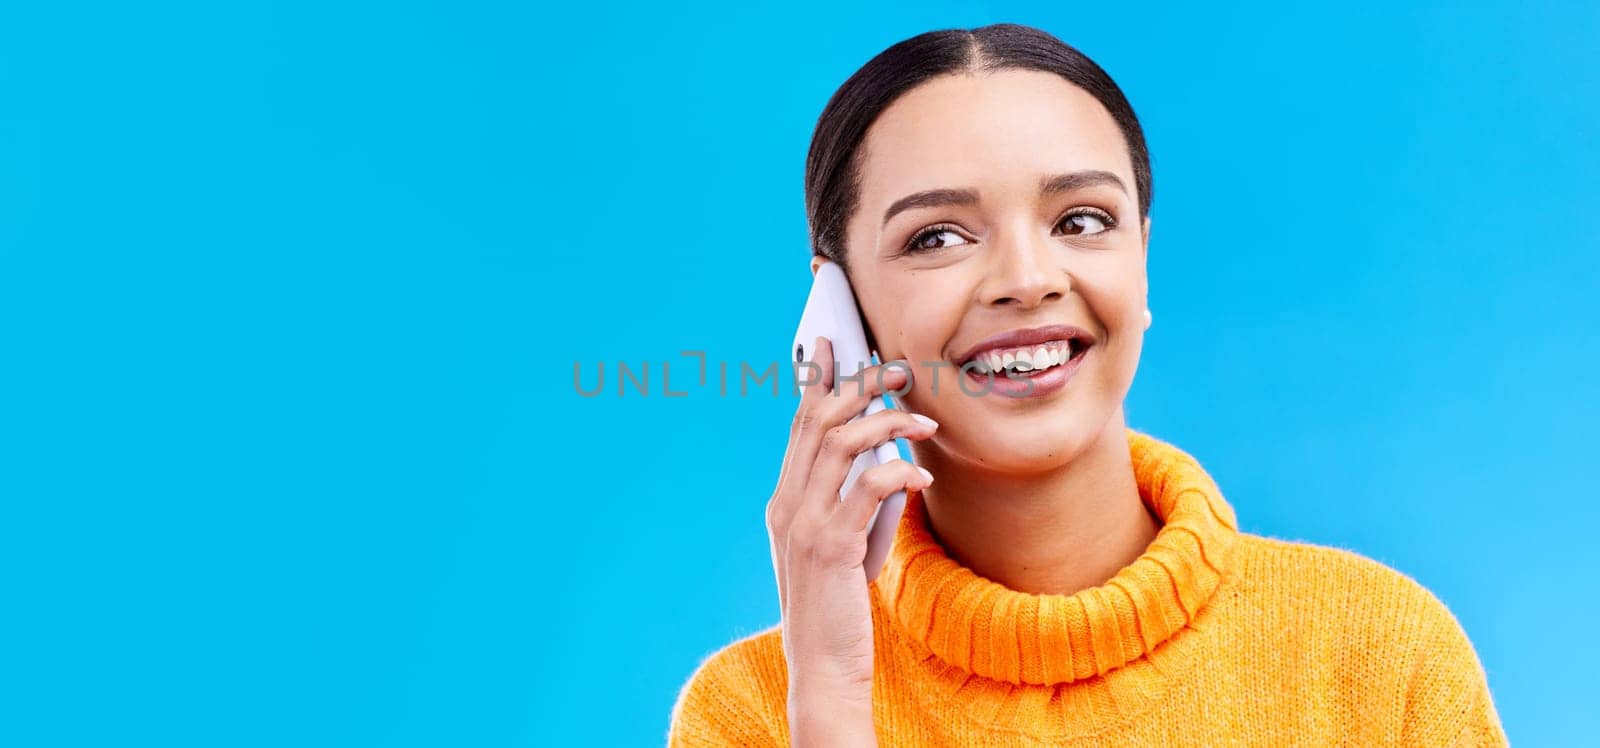 Happy woman, phone call and communication on mockup for social media, conversation or chat against a blue studio background. Female smiling on mobile smartphone in discussion or talking on copy space.